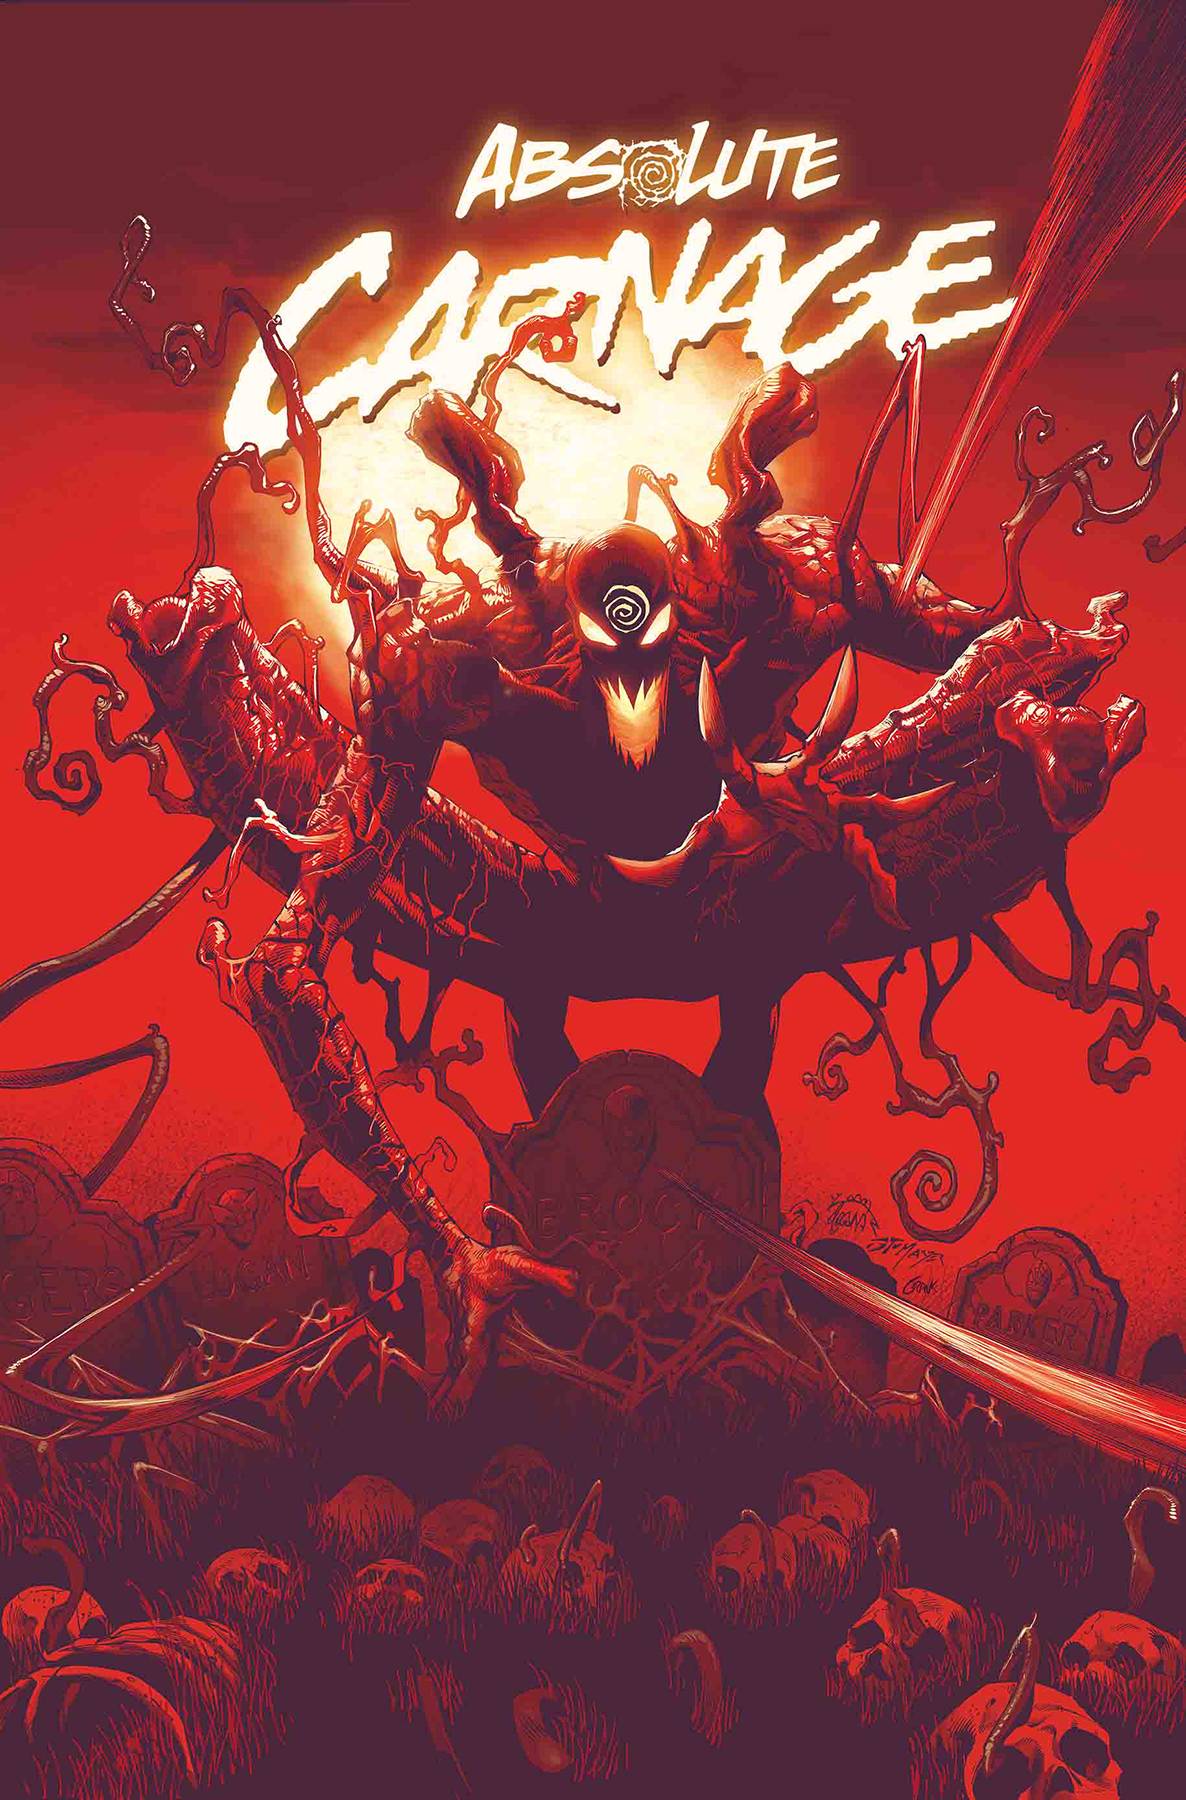 ABSOLUTE CARNAGE #1 (OF 4) 08/07/19